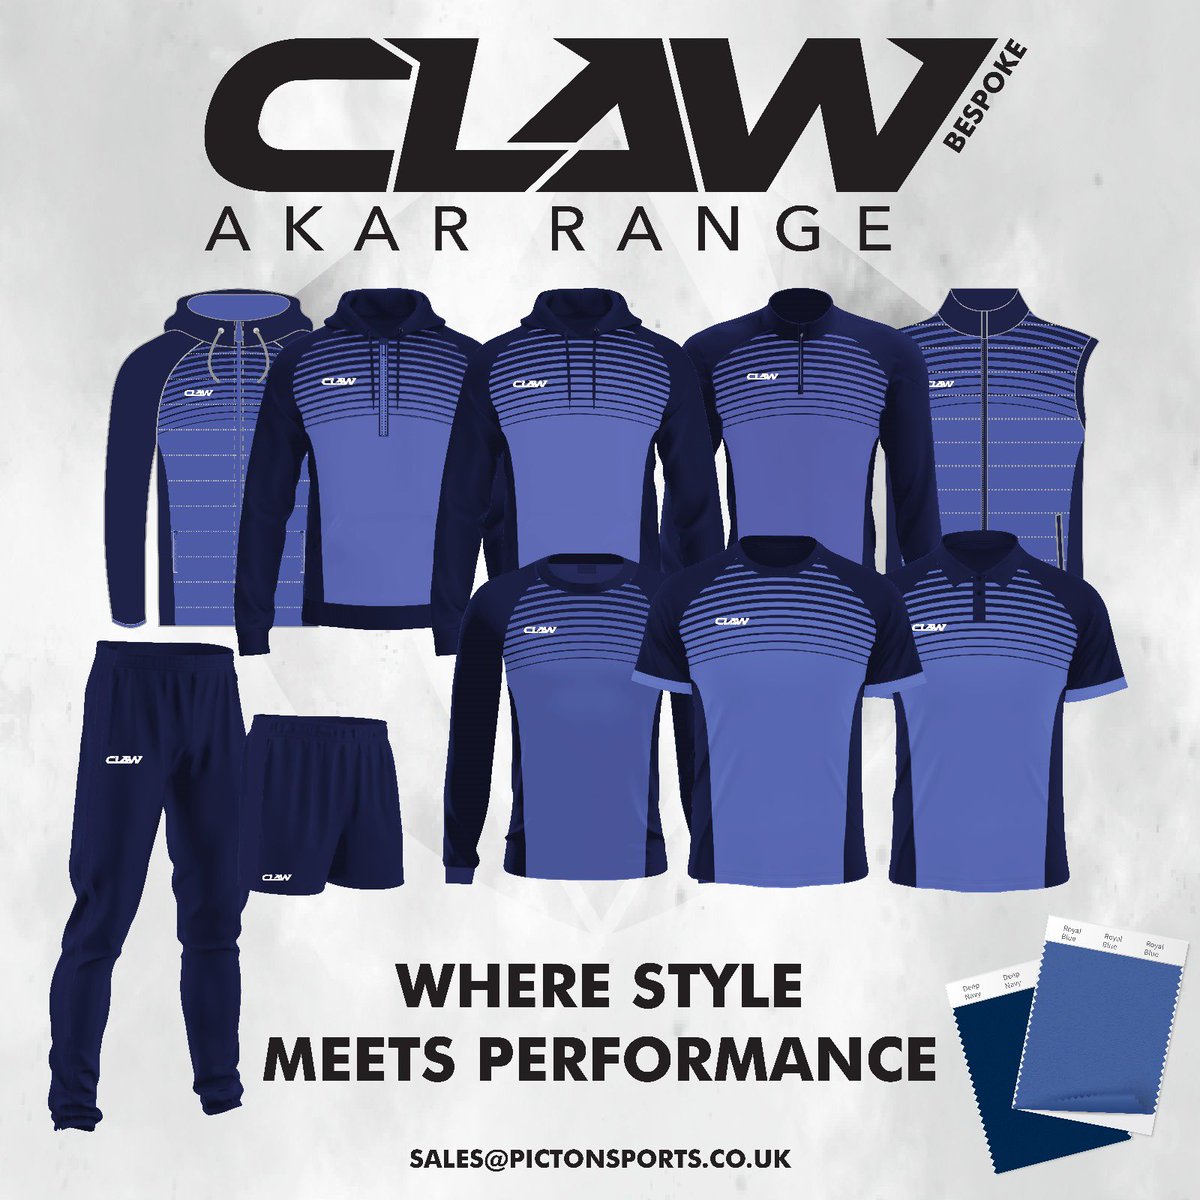 We are thrilled to unveil the new Claw Akar range! Custom colour options are available now, with stock colours coming soon. For more details or to see these designs in your team’s colors, email sales@pictonsports.co.uk. #clawteamwear